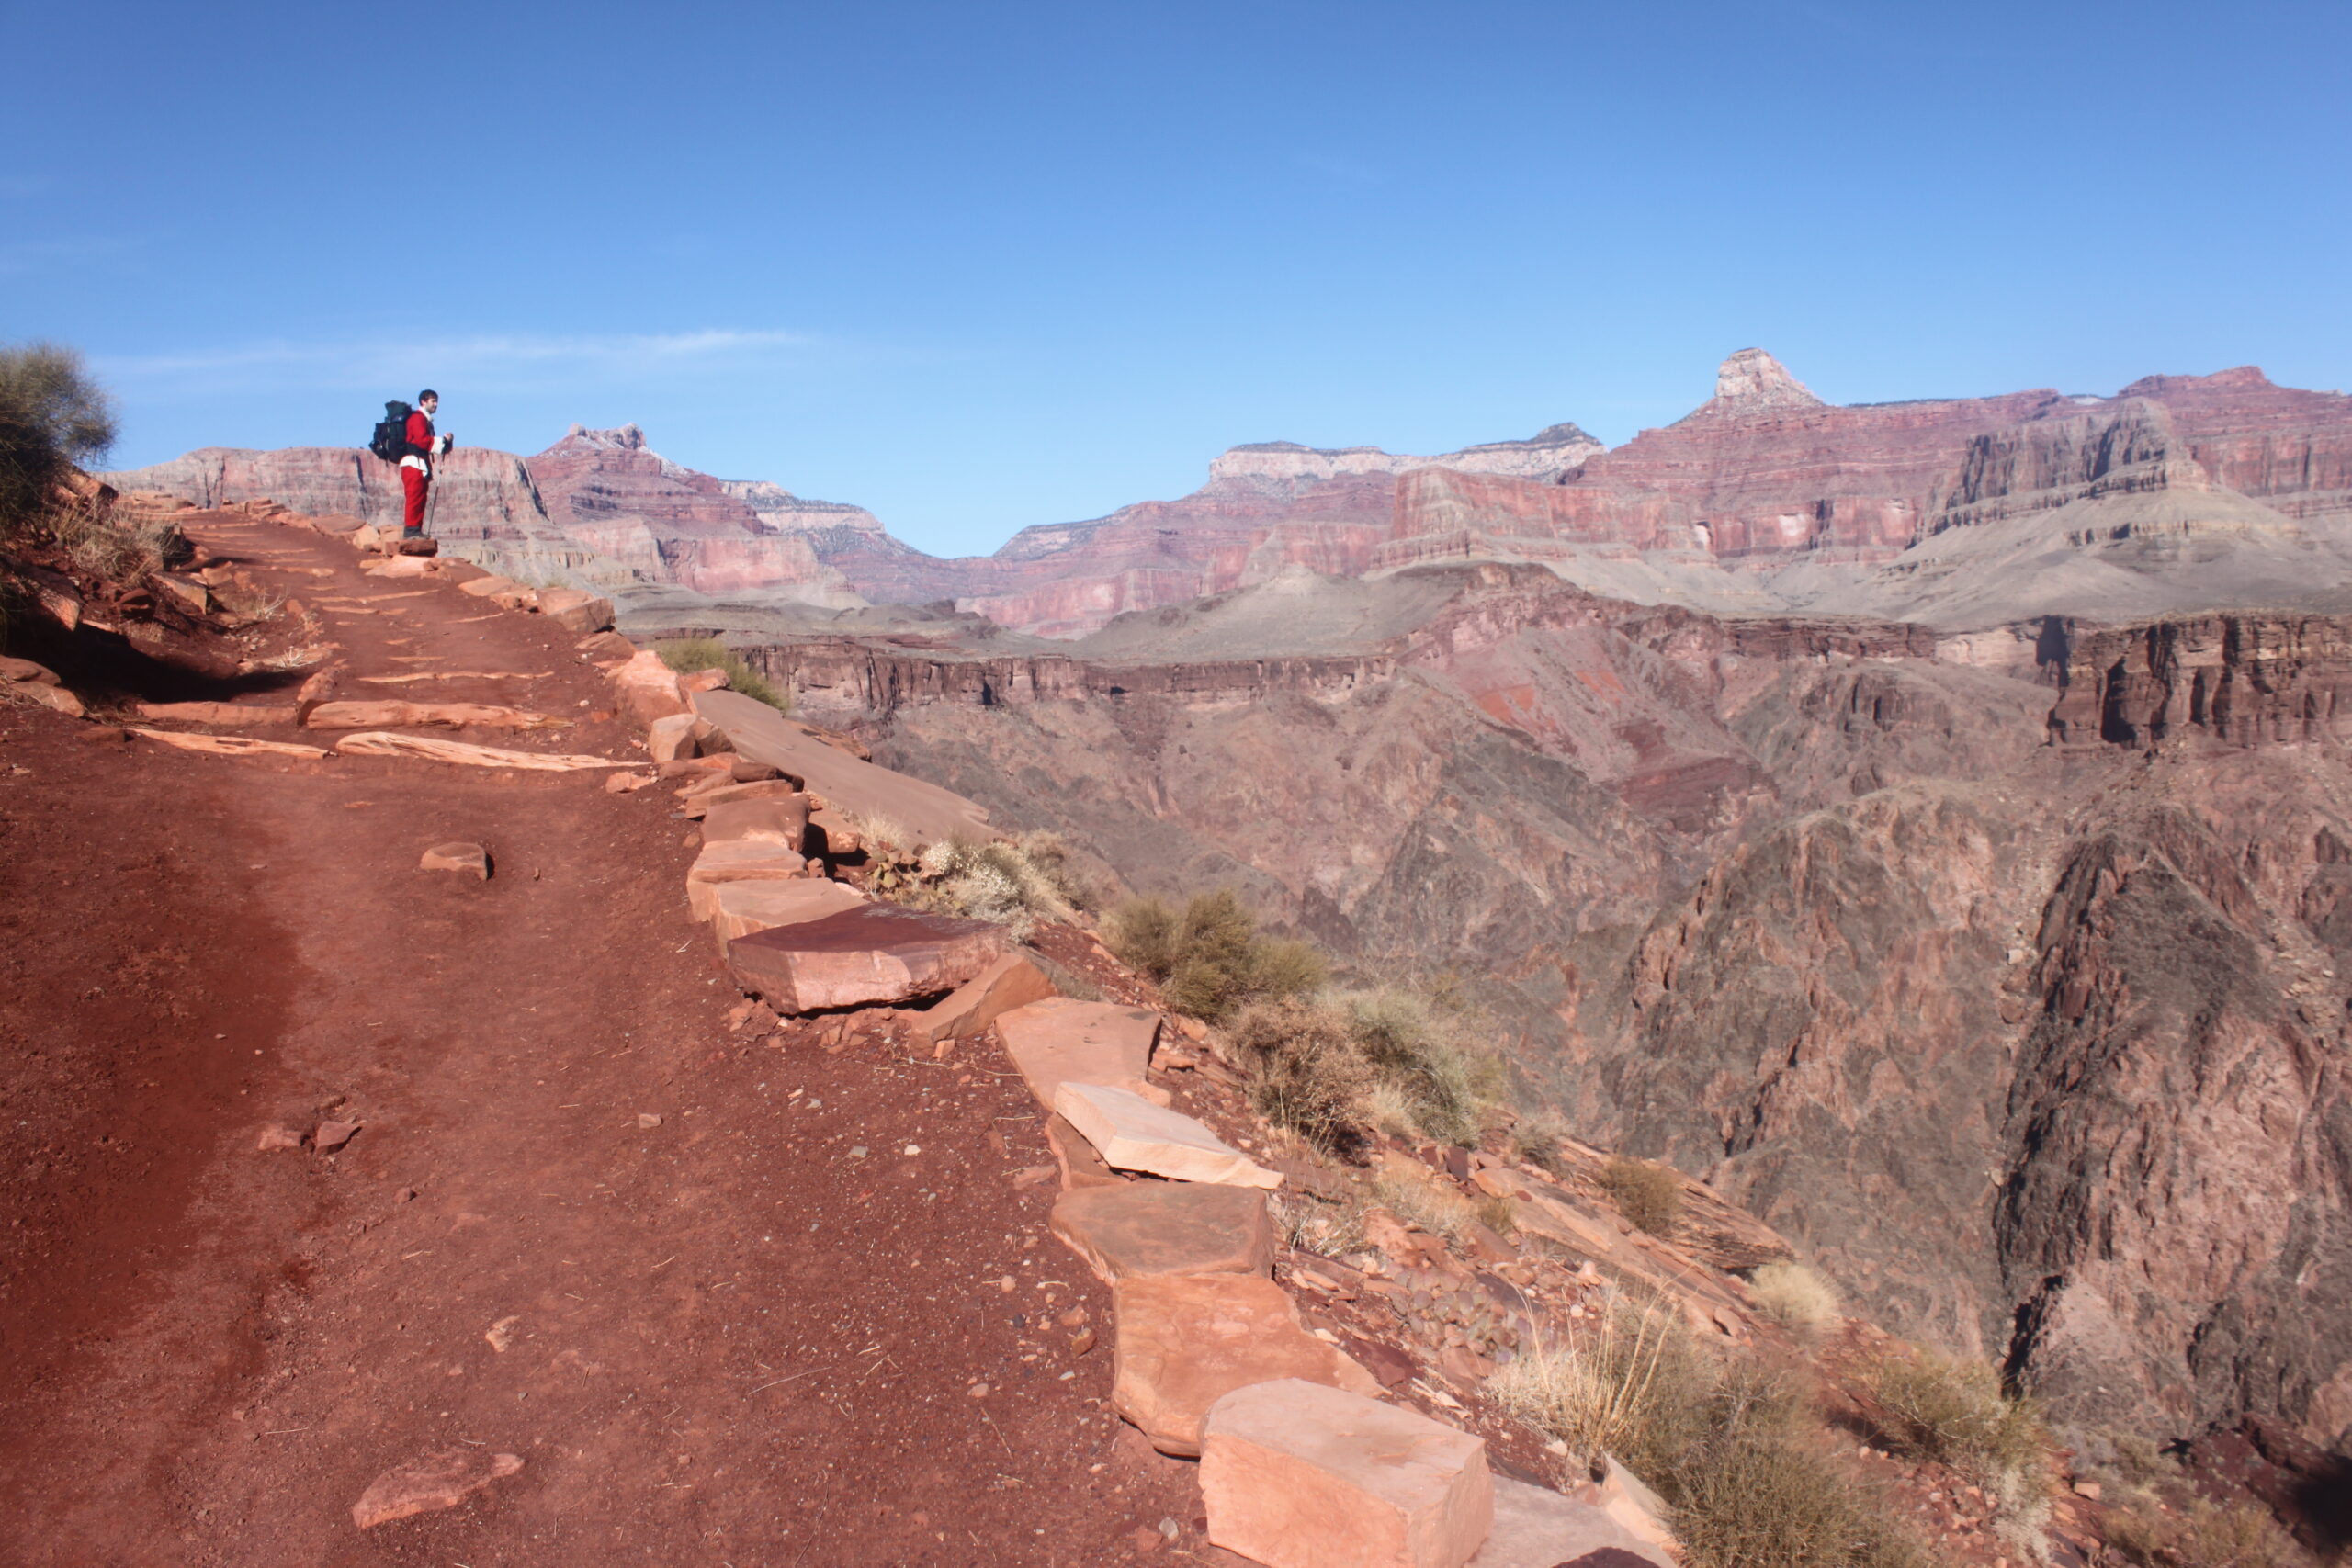 Santa Claus (a.k.a. Brian) looks out at the Grand Canyon from the South Kaibab Trail.